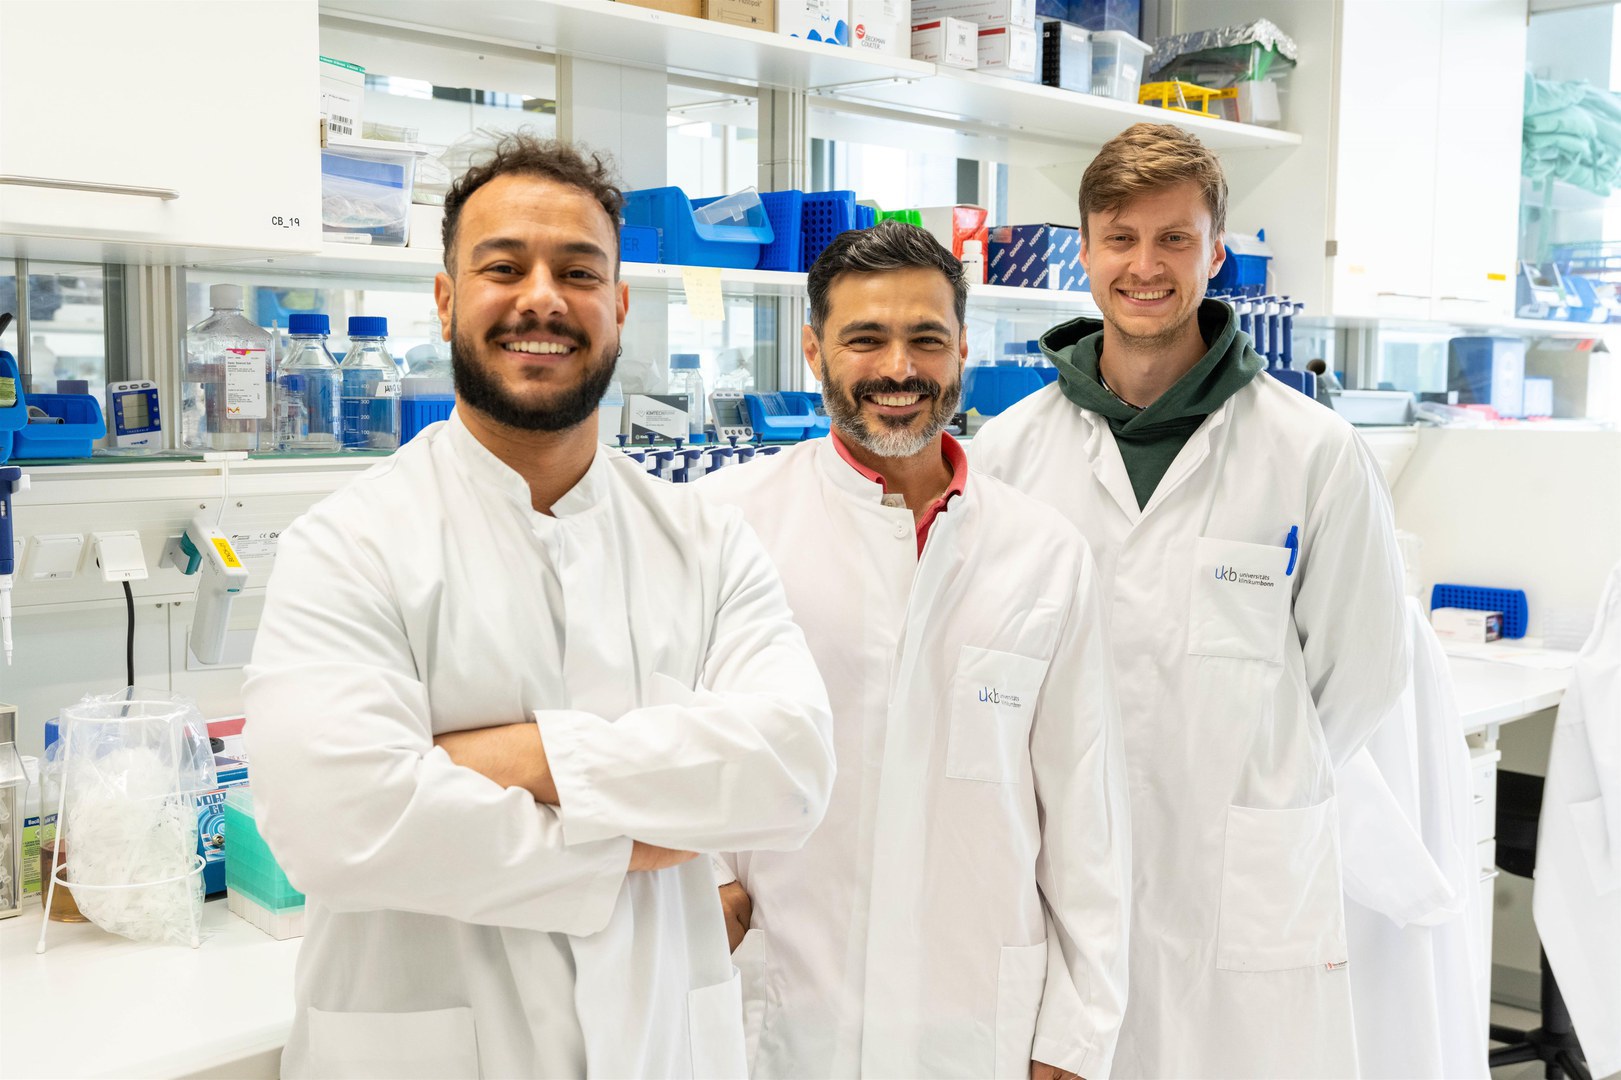 From left: - Dr. Ibrahim Hawwari, Prof. Bernardo Franklin and Lukas Roßnagel discover a new intercellular communication mechanism in which blood platelets, so-called thrombocytes, regulate the function of monocytes.